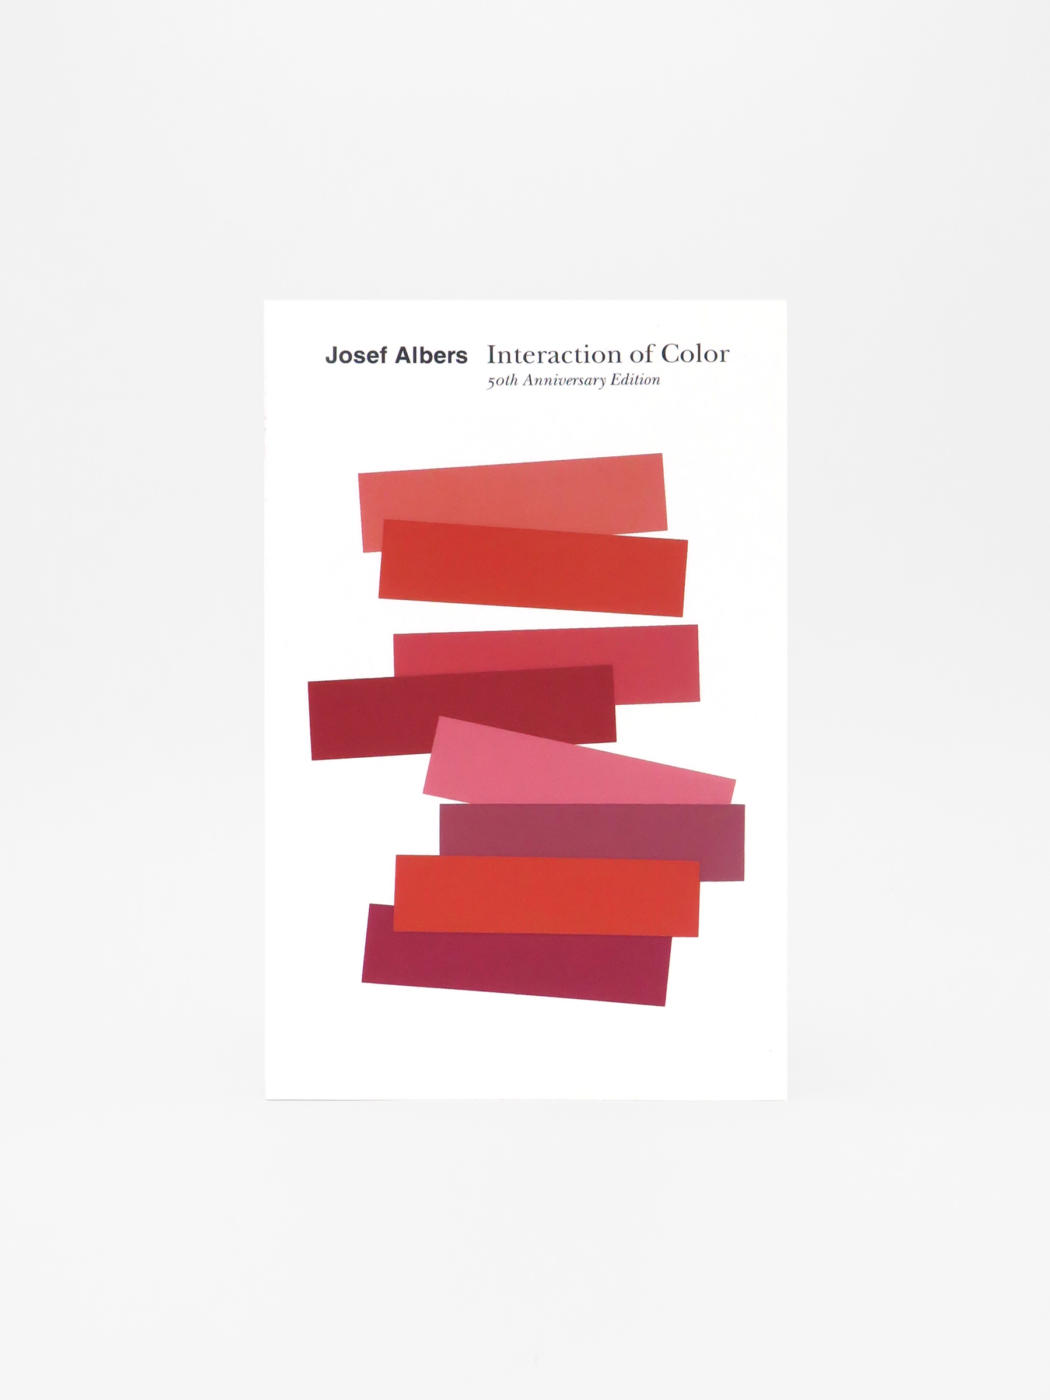 Josef Albers, Interaction of Color